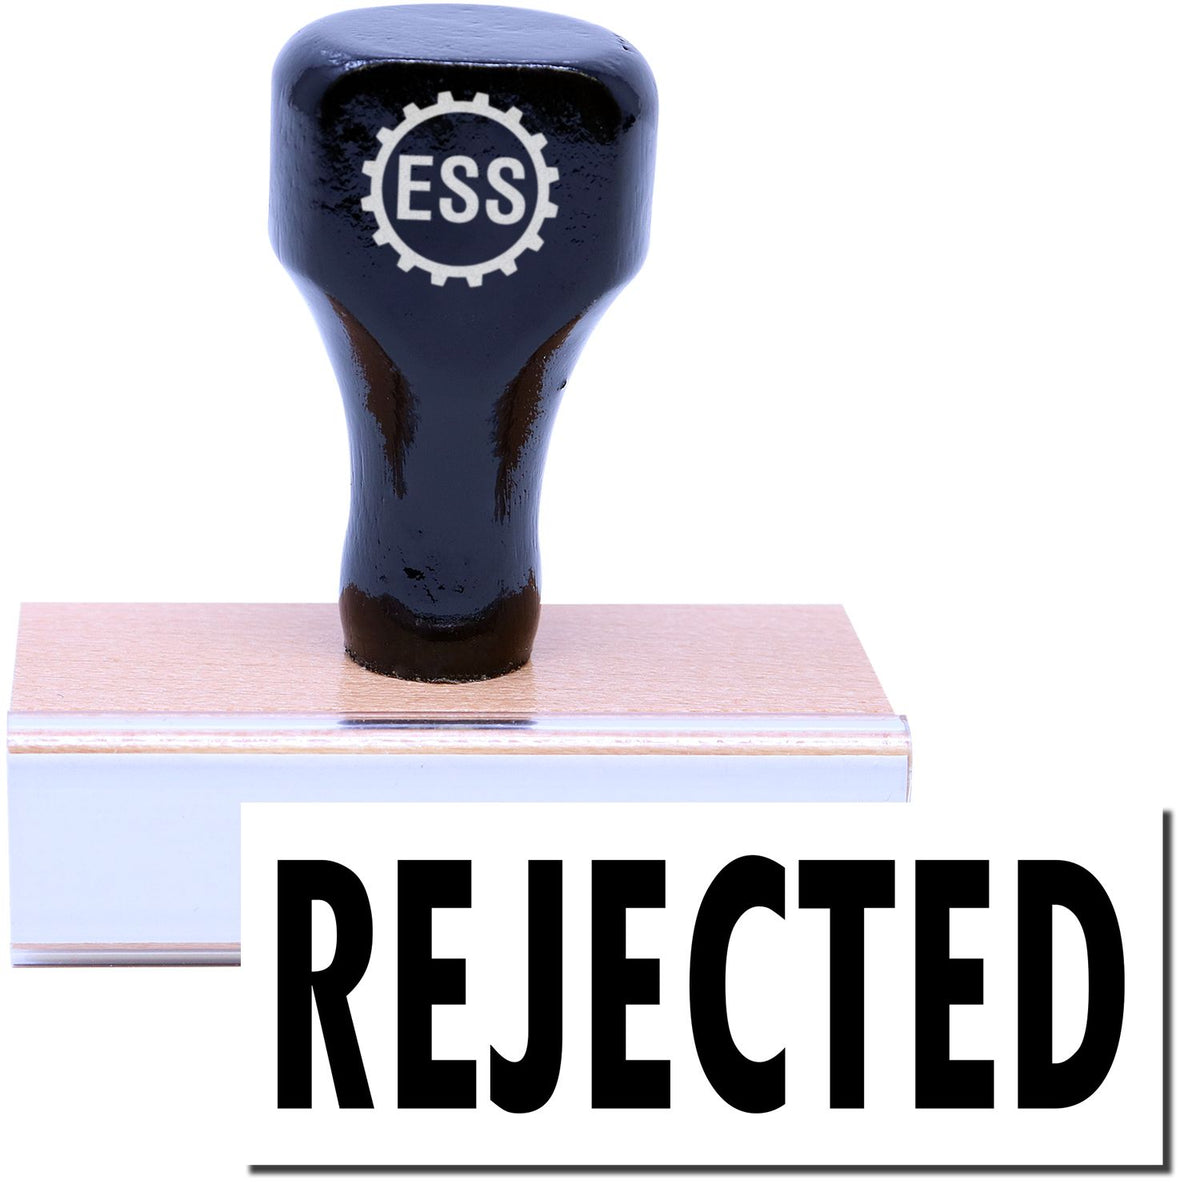 A stock office rubber stamp with a stamped image showing how the text &quot;REJECTED&quot; in a large font is displayed after stamping.